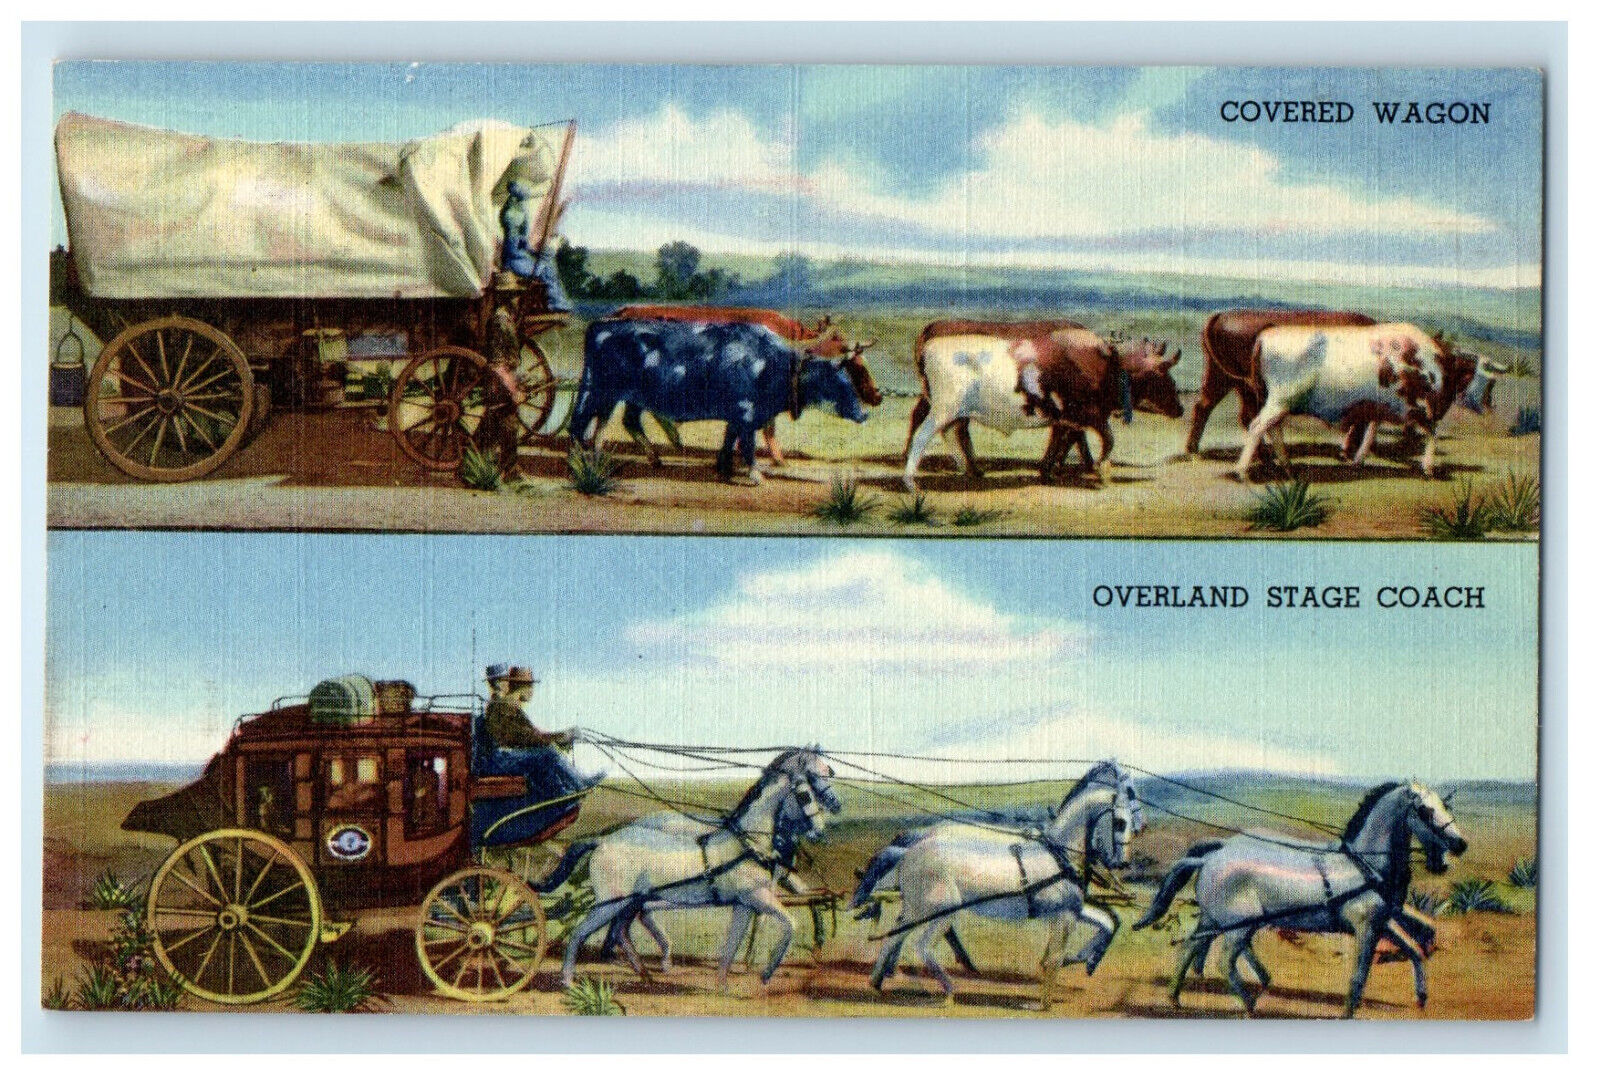 c1940s Covered Wagon and Overland Stage Coach Dioramas at State Museum Postcard